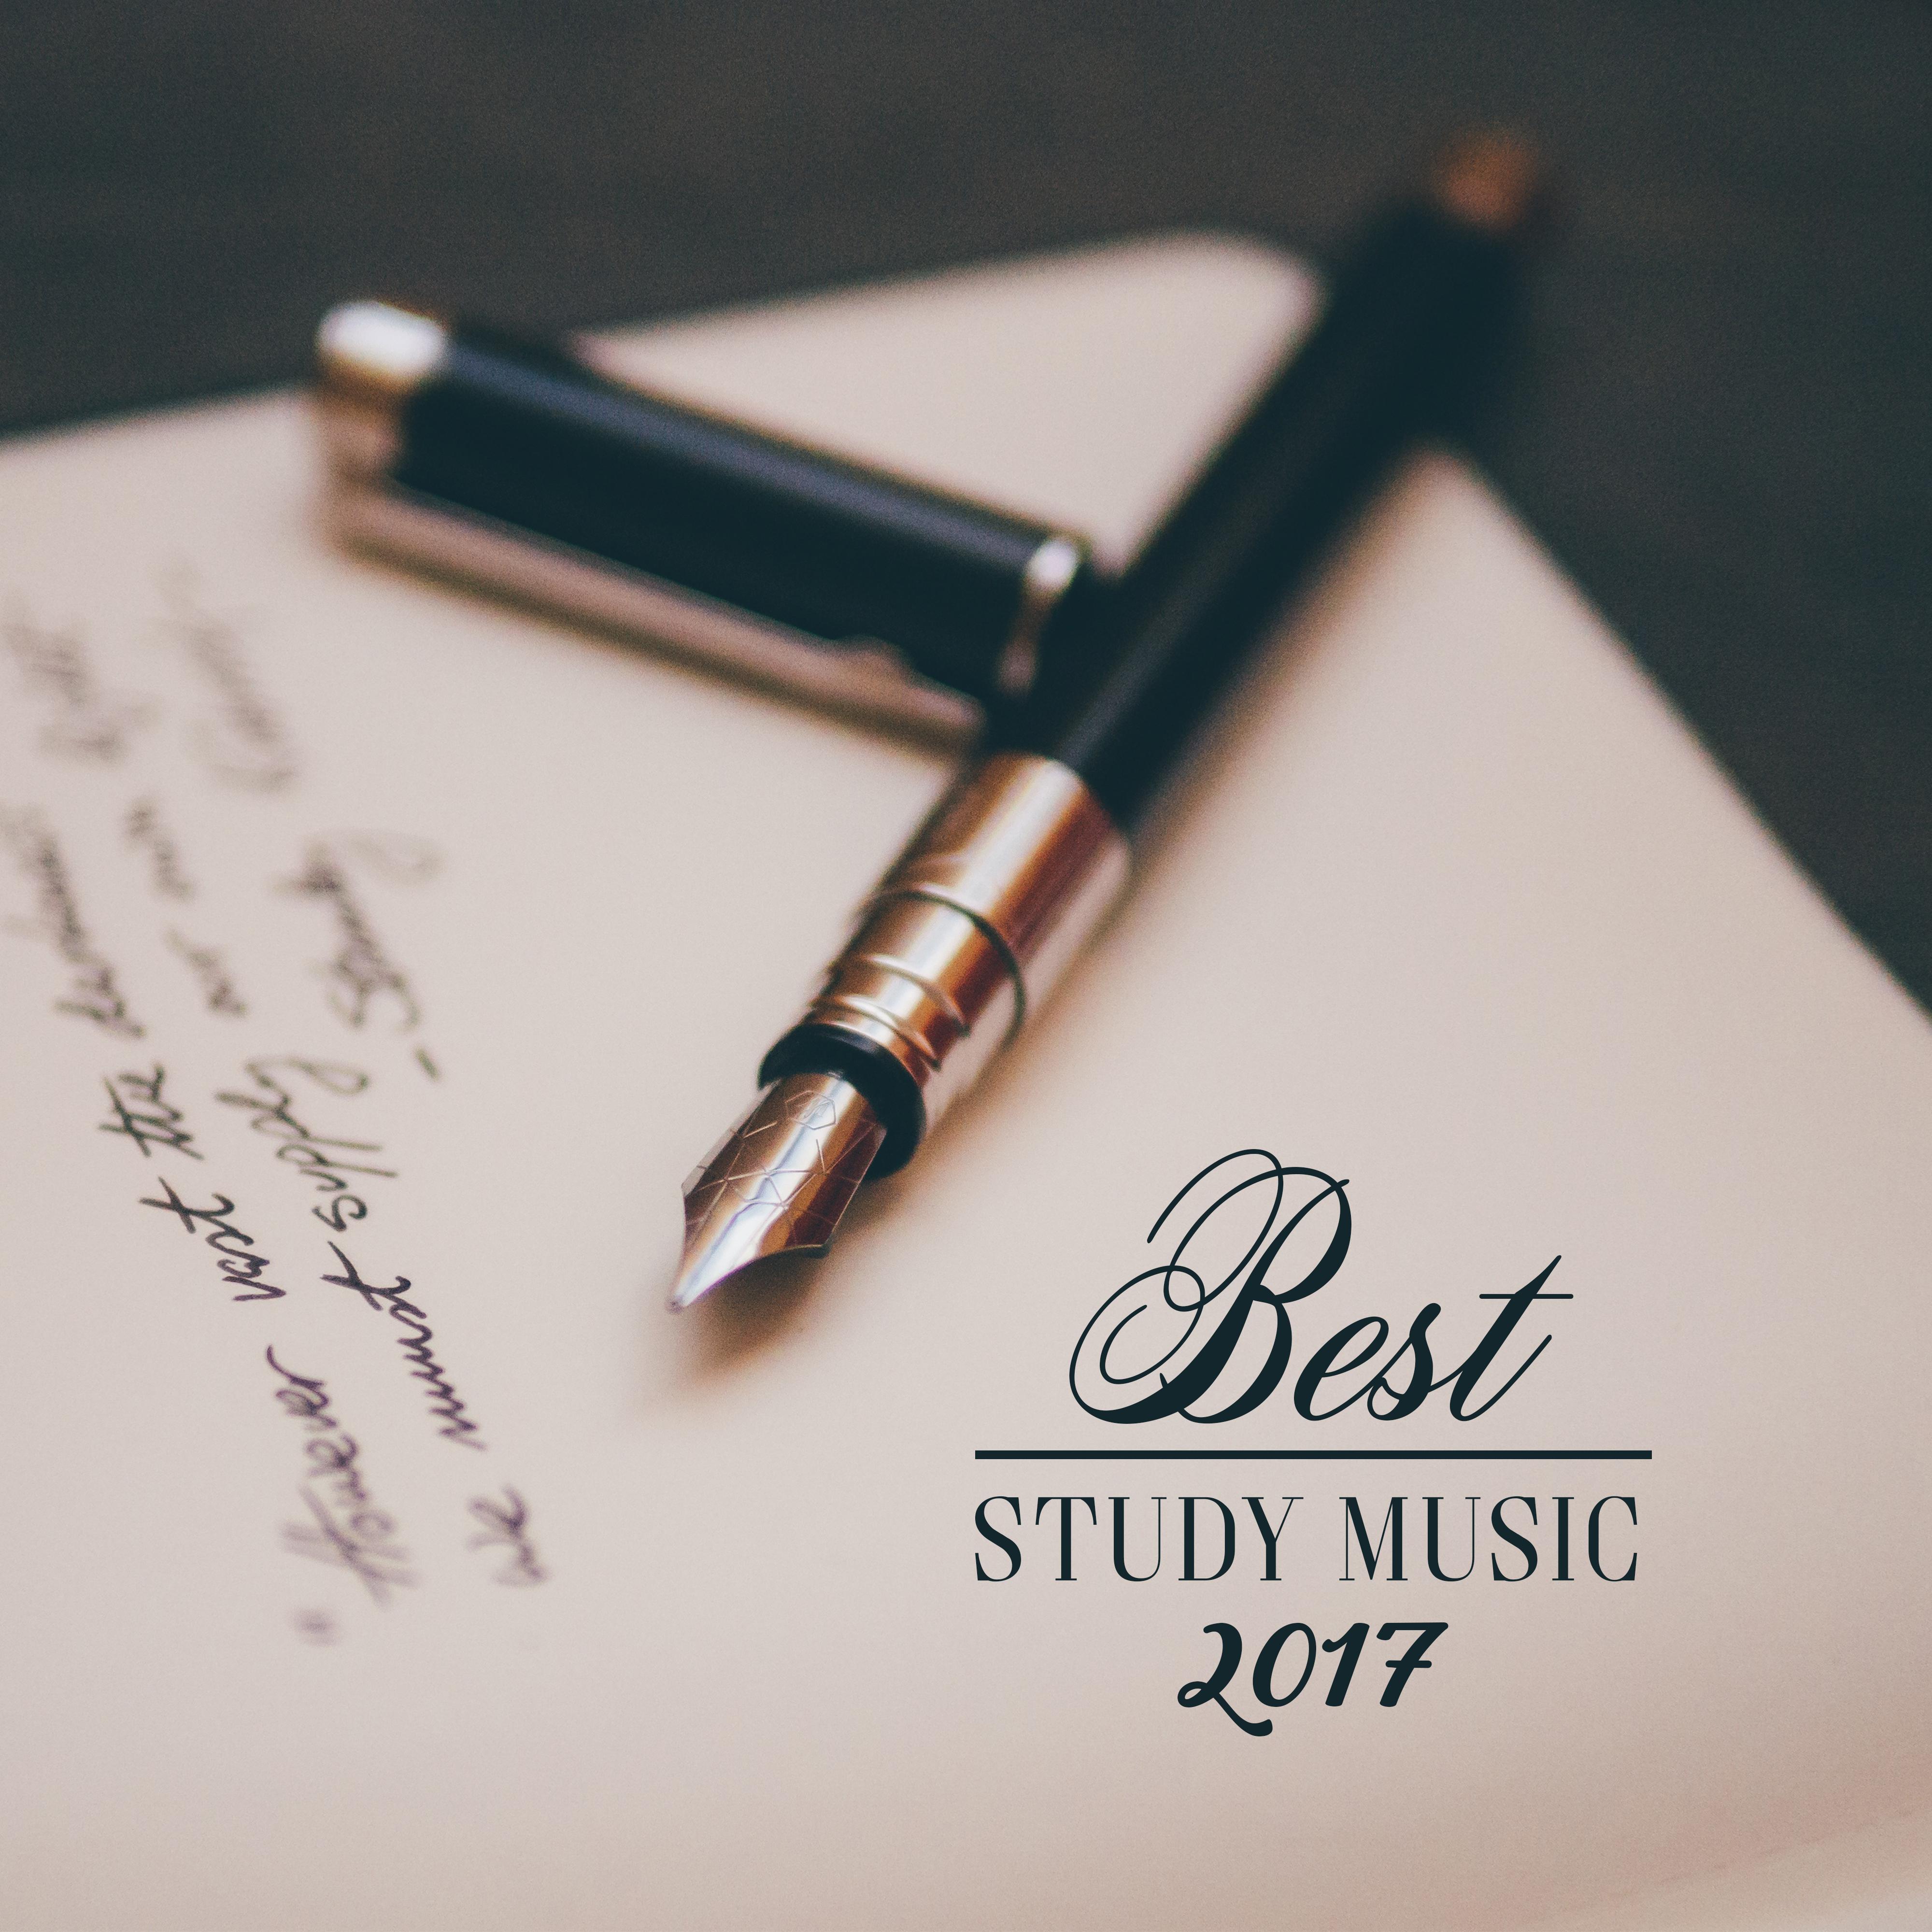 Best Study Music 2017 – Easy Learning, Focus, Better Concentration, Stress Relief, Mozart, Bach to Work